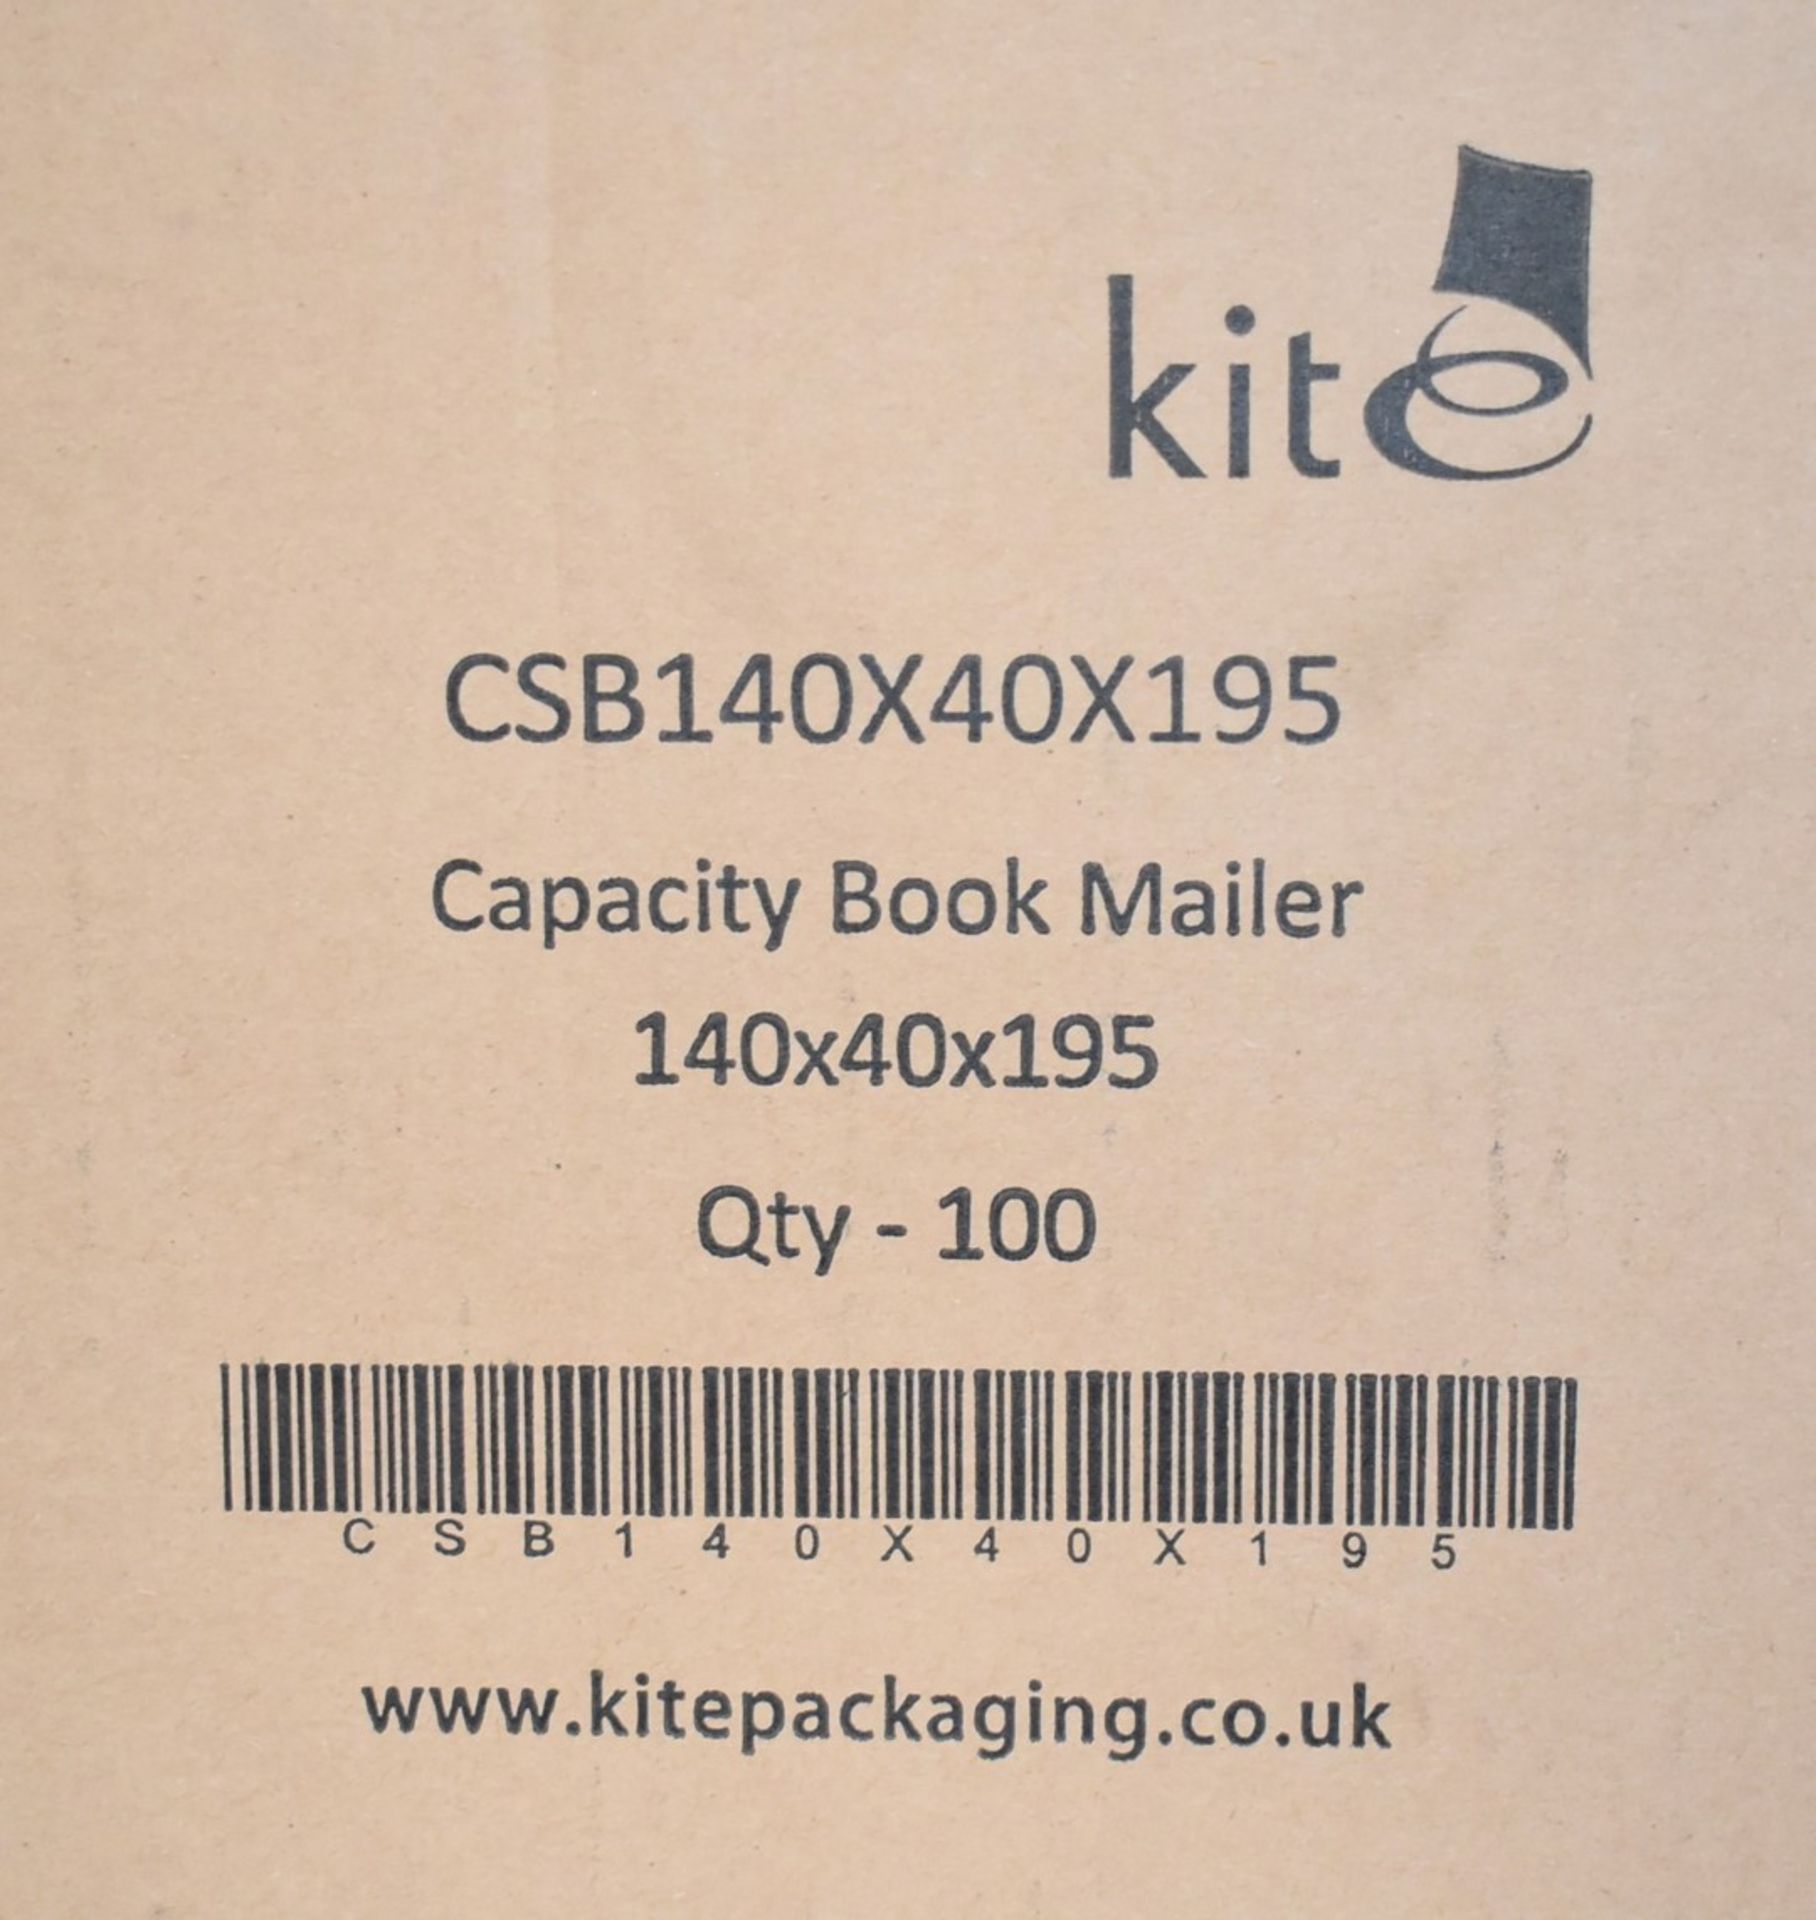 200 x Capacity Book Mailer Cardboard Envelopes - Size: 140 x 140 x 195mm - Includes 2 x Boxes of 100 - Bild 4 aus 6